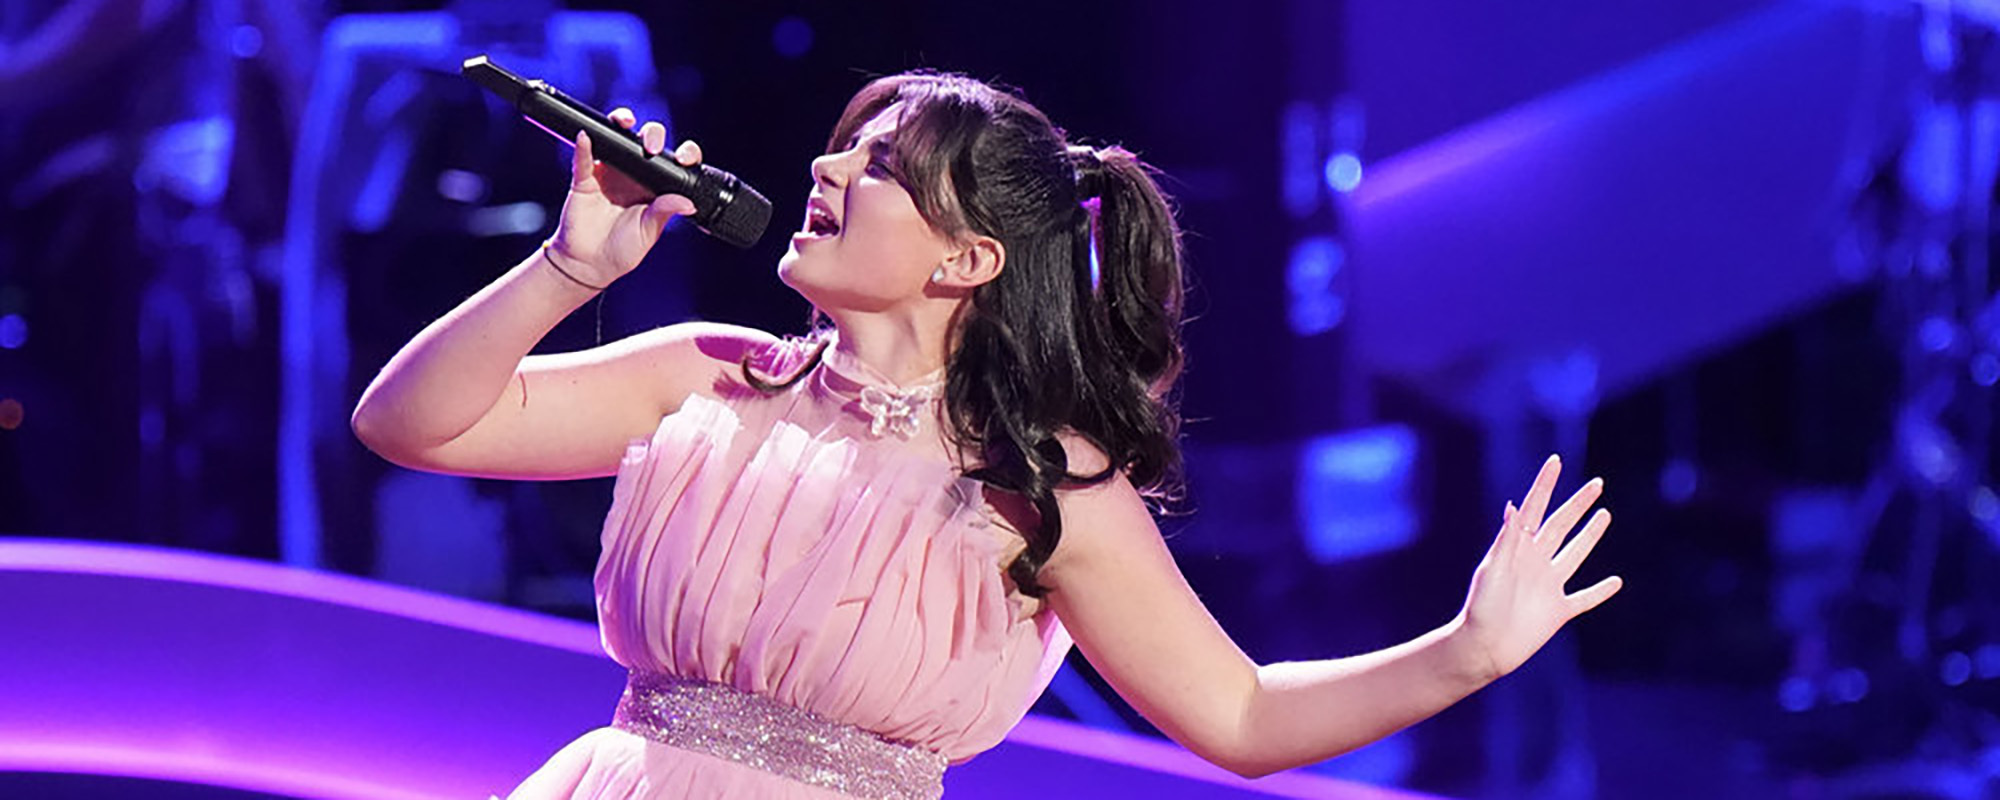 Julia Roome's Rendition of Sia's "Unstoppable" on 'The Voice'